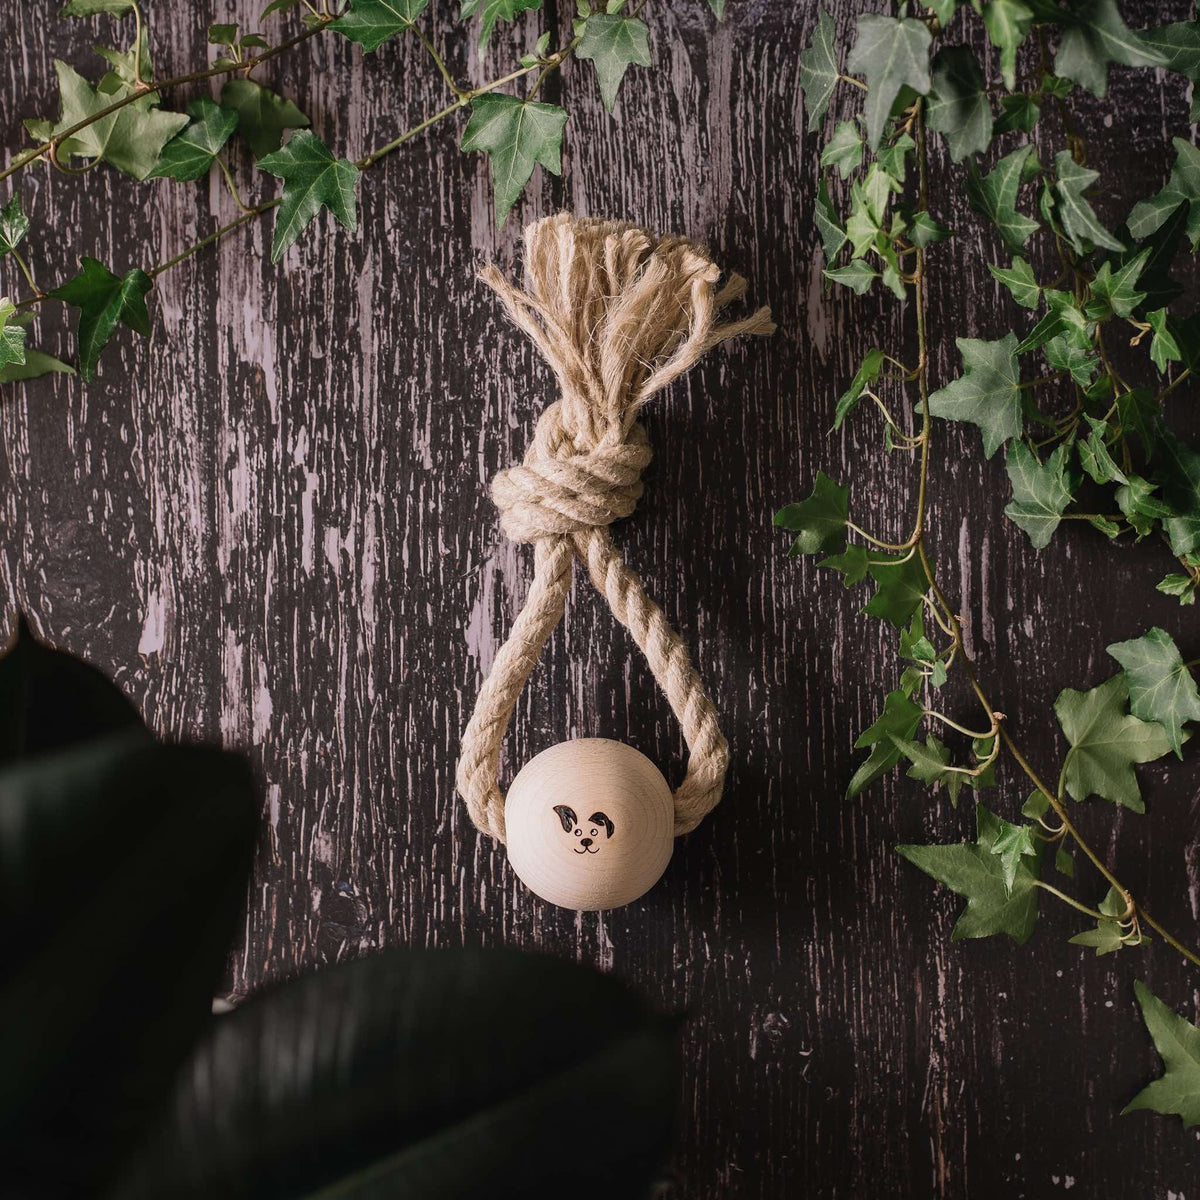 Top Knot - Smug Mutts Natural Hemp Rope and Beech Wood Dog Toy, Ring Shaped Holding the Ball in Place, Top View, Natural and Eco Friendly Dog Toy